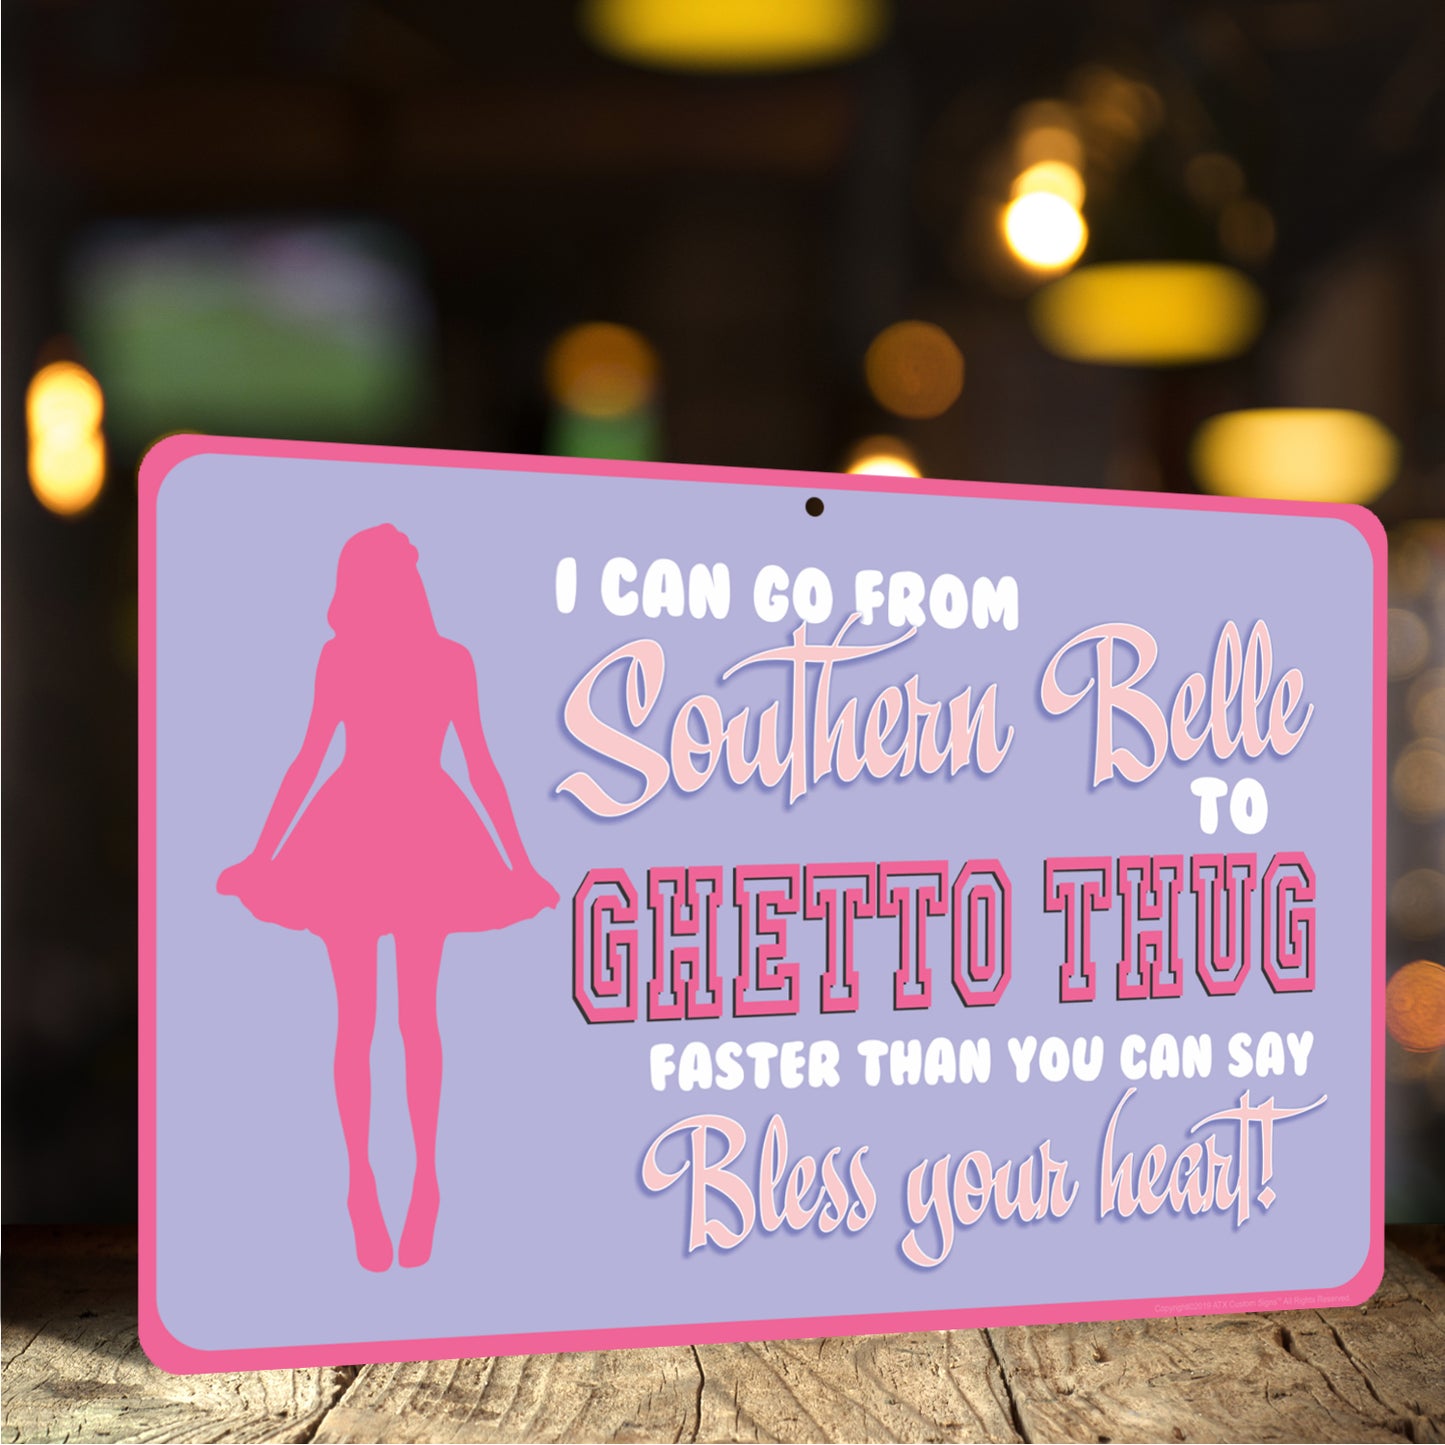 Funny Bar Sign, I can go from Southern Belle to Ghetto Thug faster that you can say Bless your heart! (Dark) - Size 8 x 12